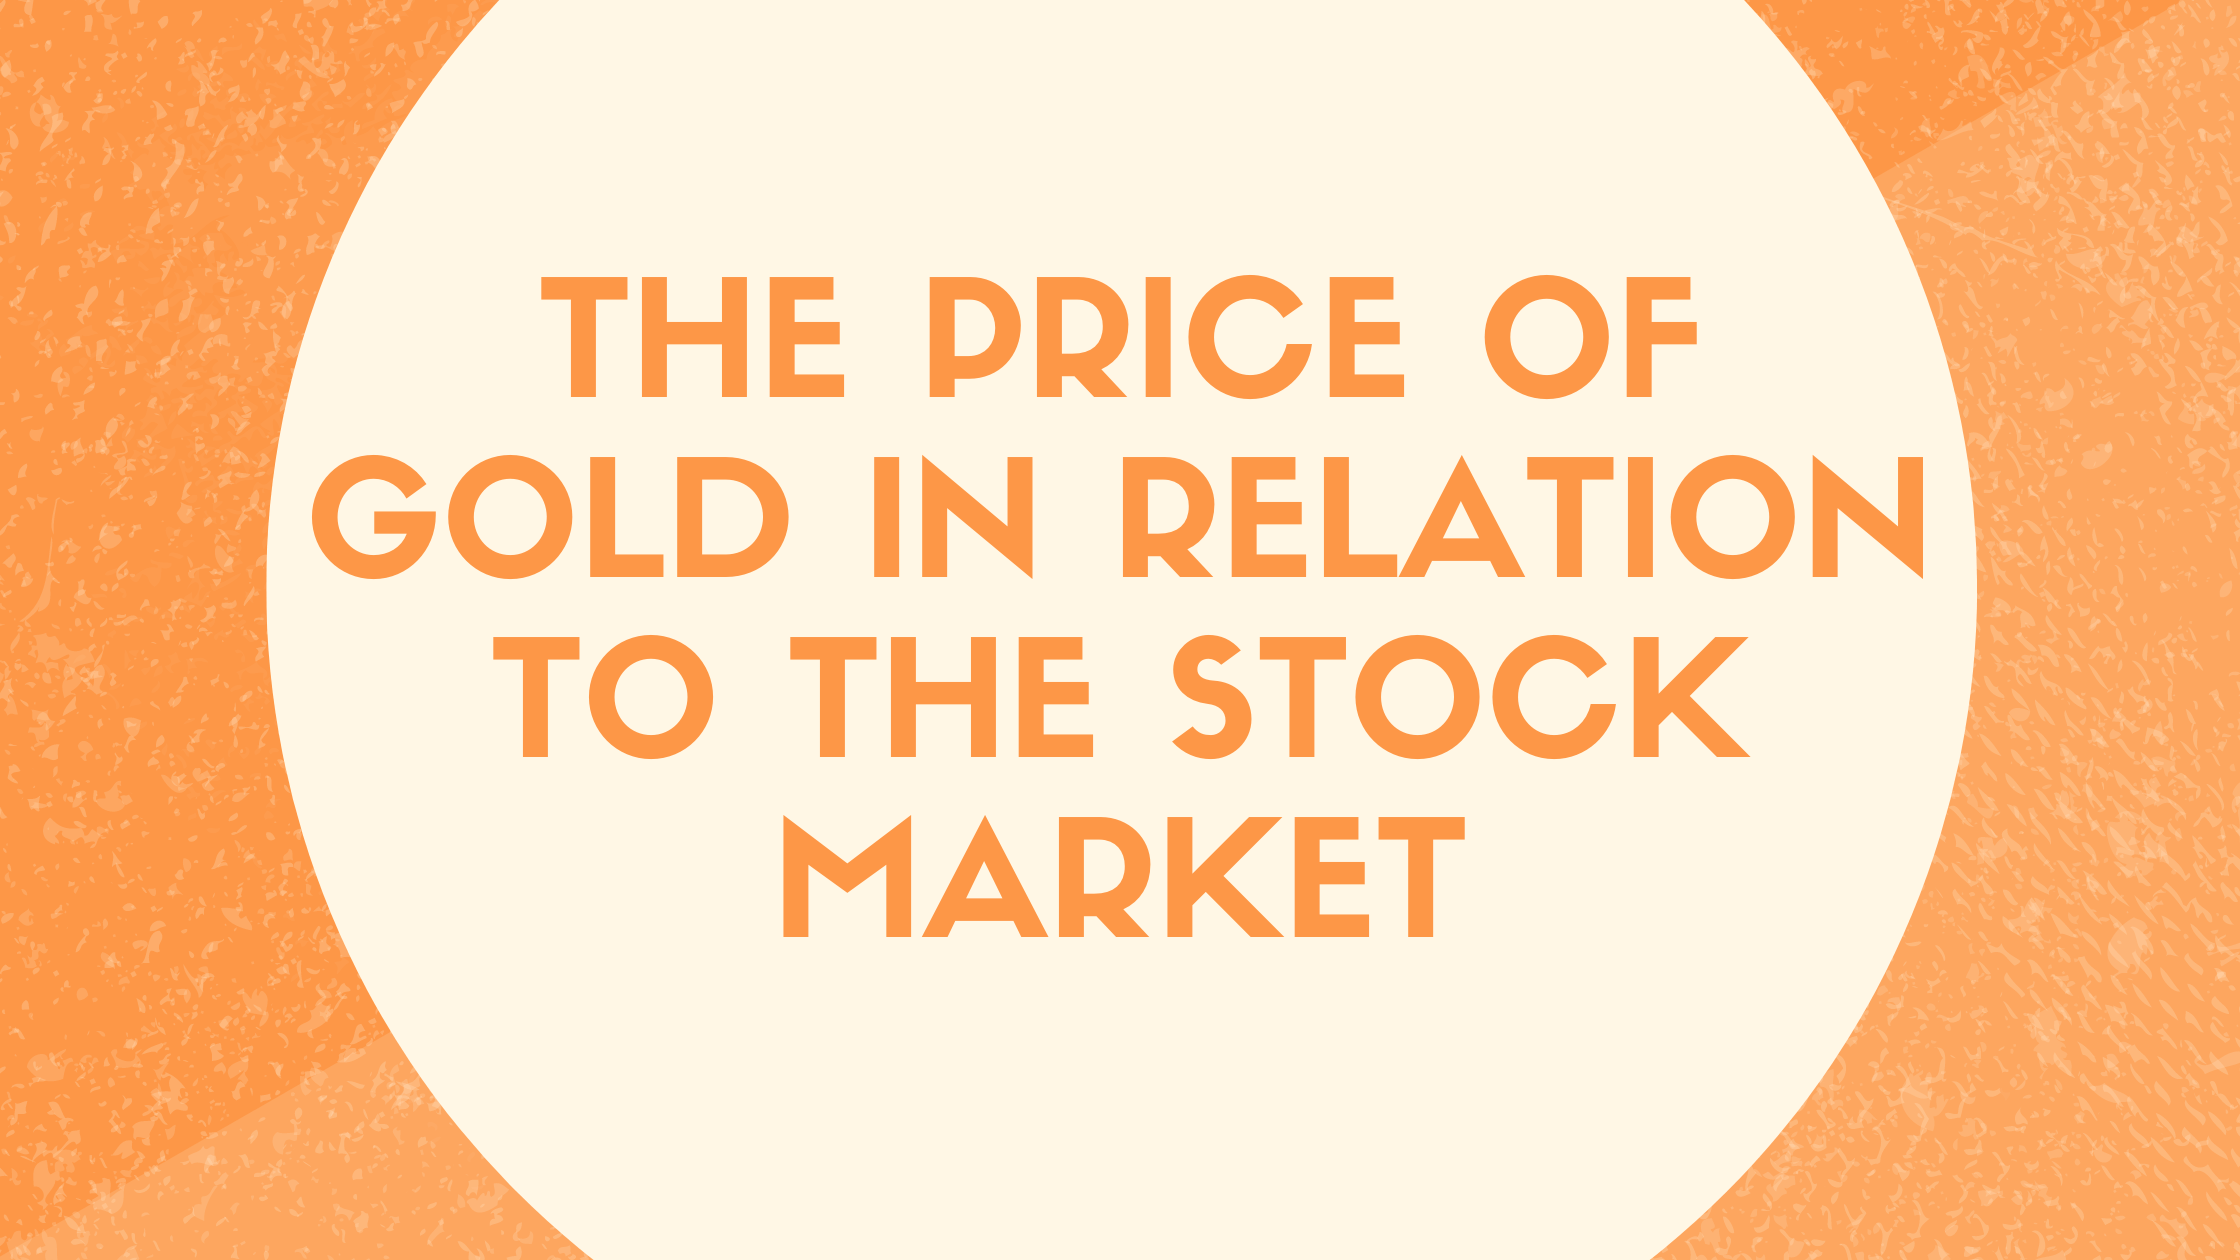 Gold in Relation to the Stock Market